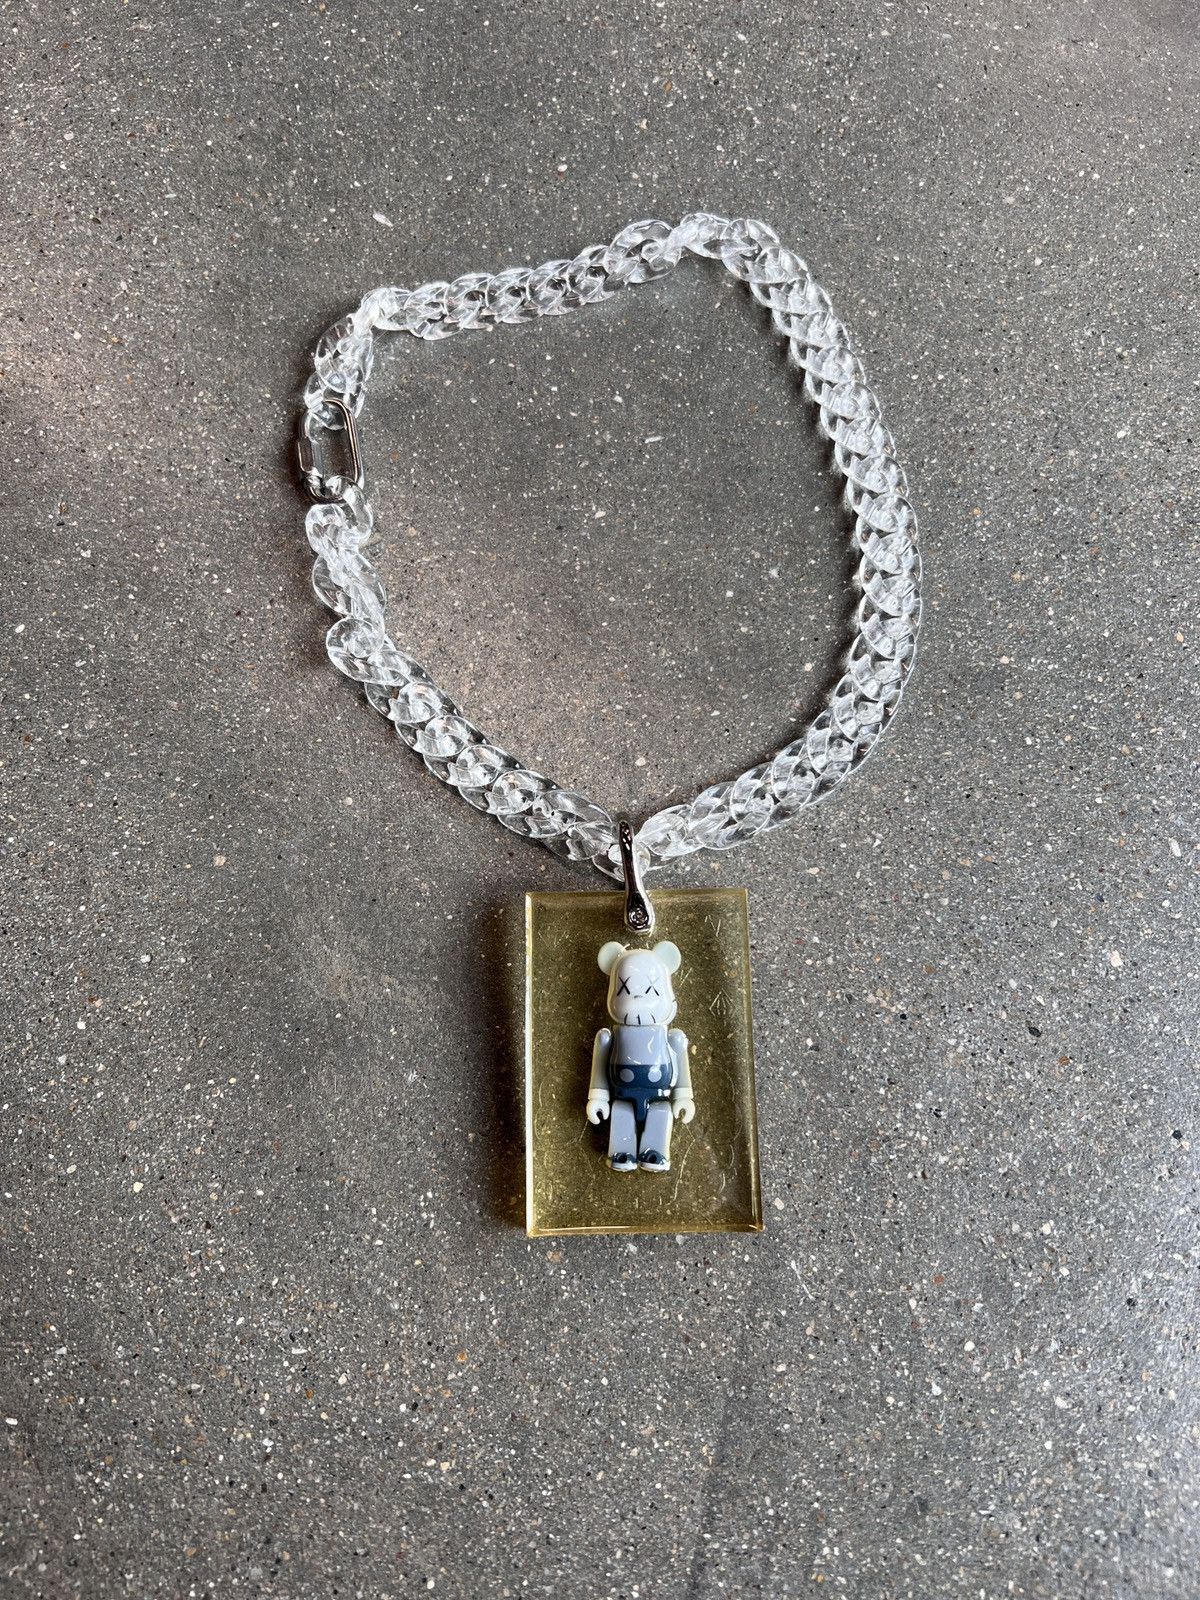 Pre-owned Kaws Kristopher Kites Necklace  Bearbrick 2011 1 Of 1 Unique In Clear